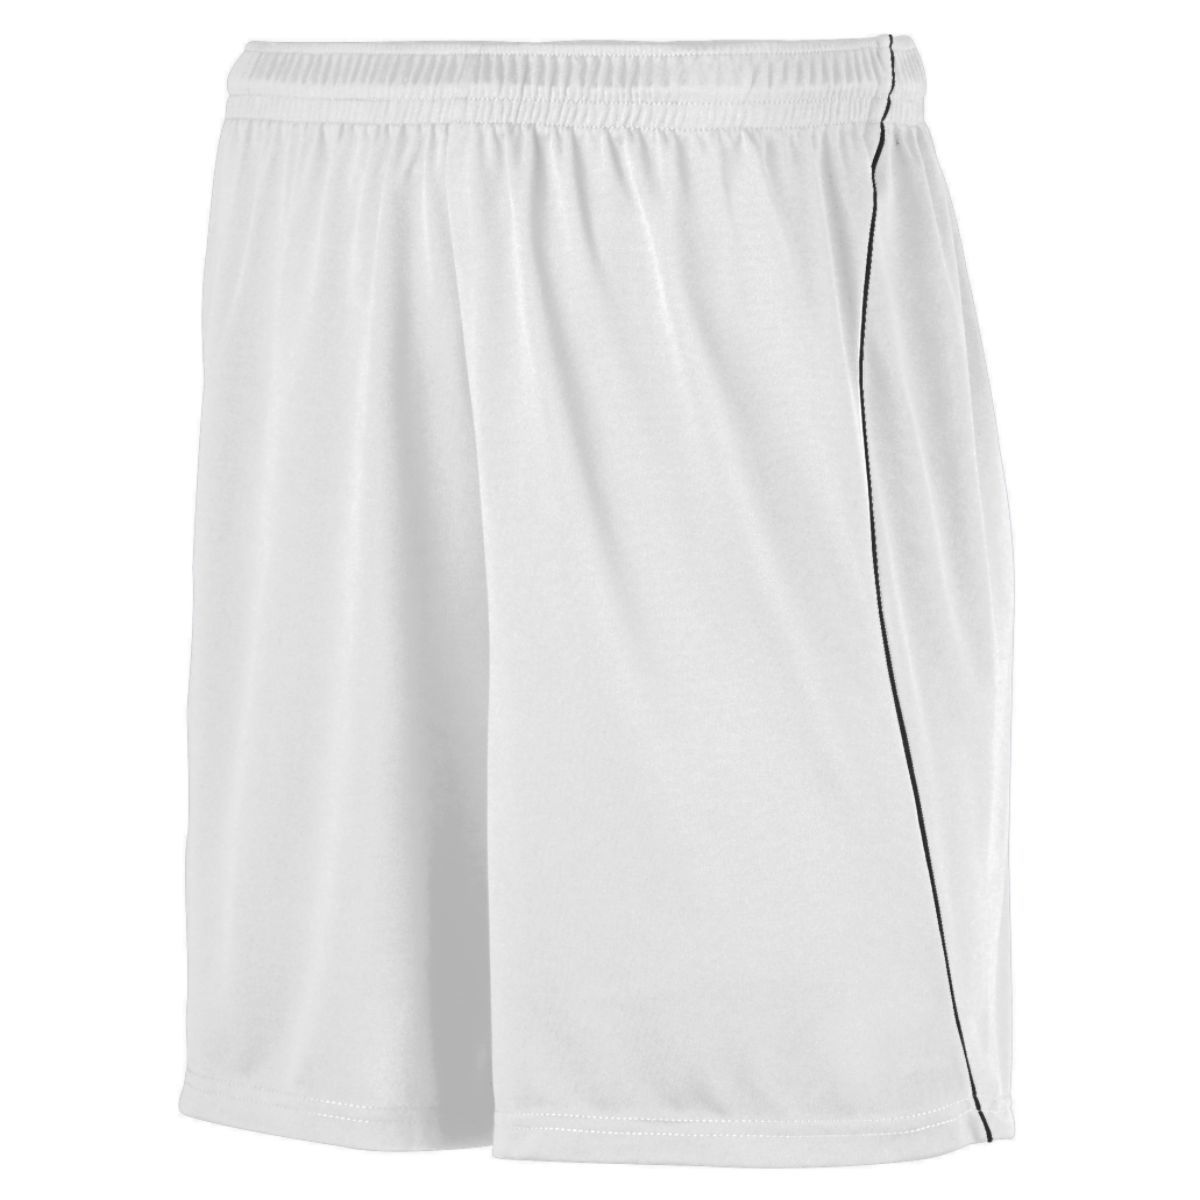 Augusta Sportswear Youth Wicking Soccer Shorts With Piping in White/Black  -Part of the Youth, Youth-Shorts, Augusta-Products, Soccer, All-Sports-1 product lines at KanaleyCreations.com